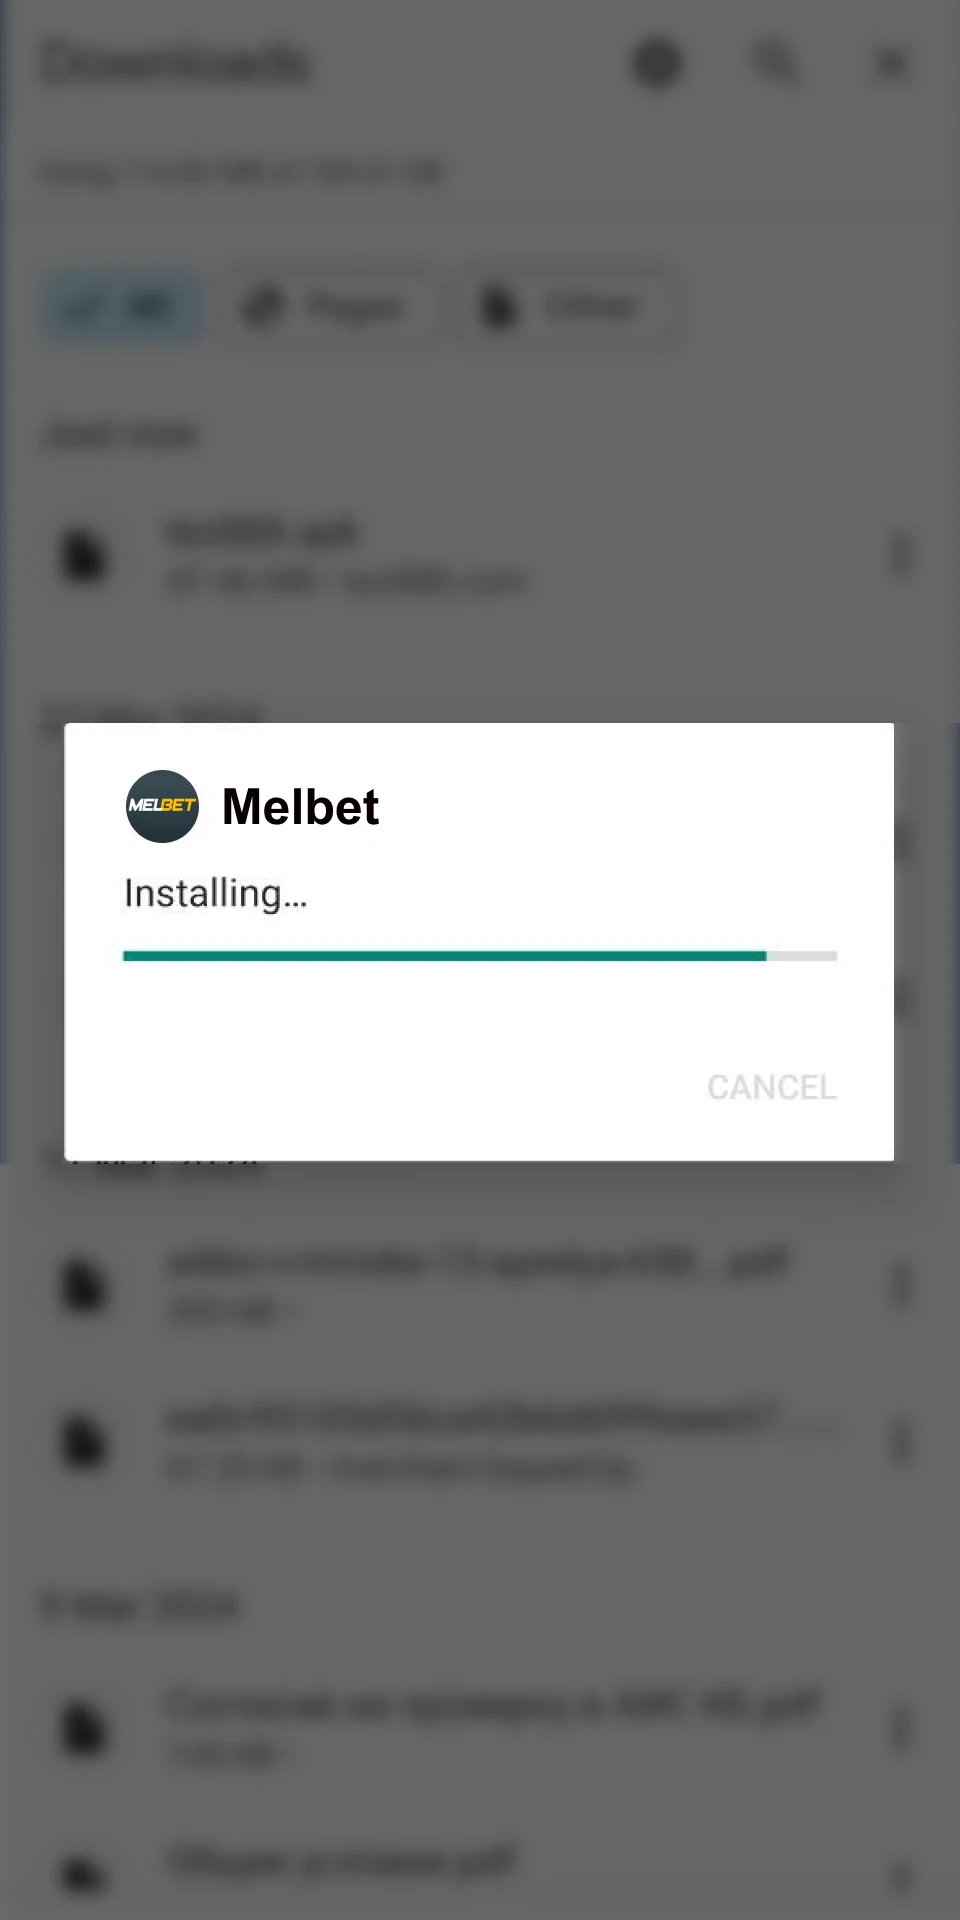 Install the Melbet app on your Android device.